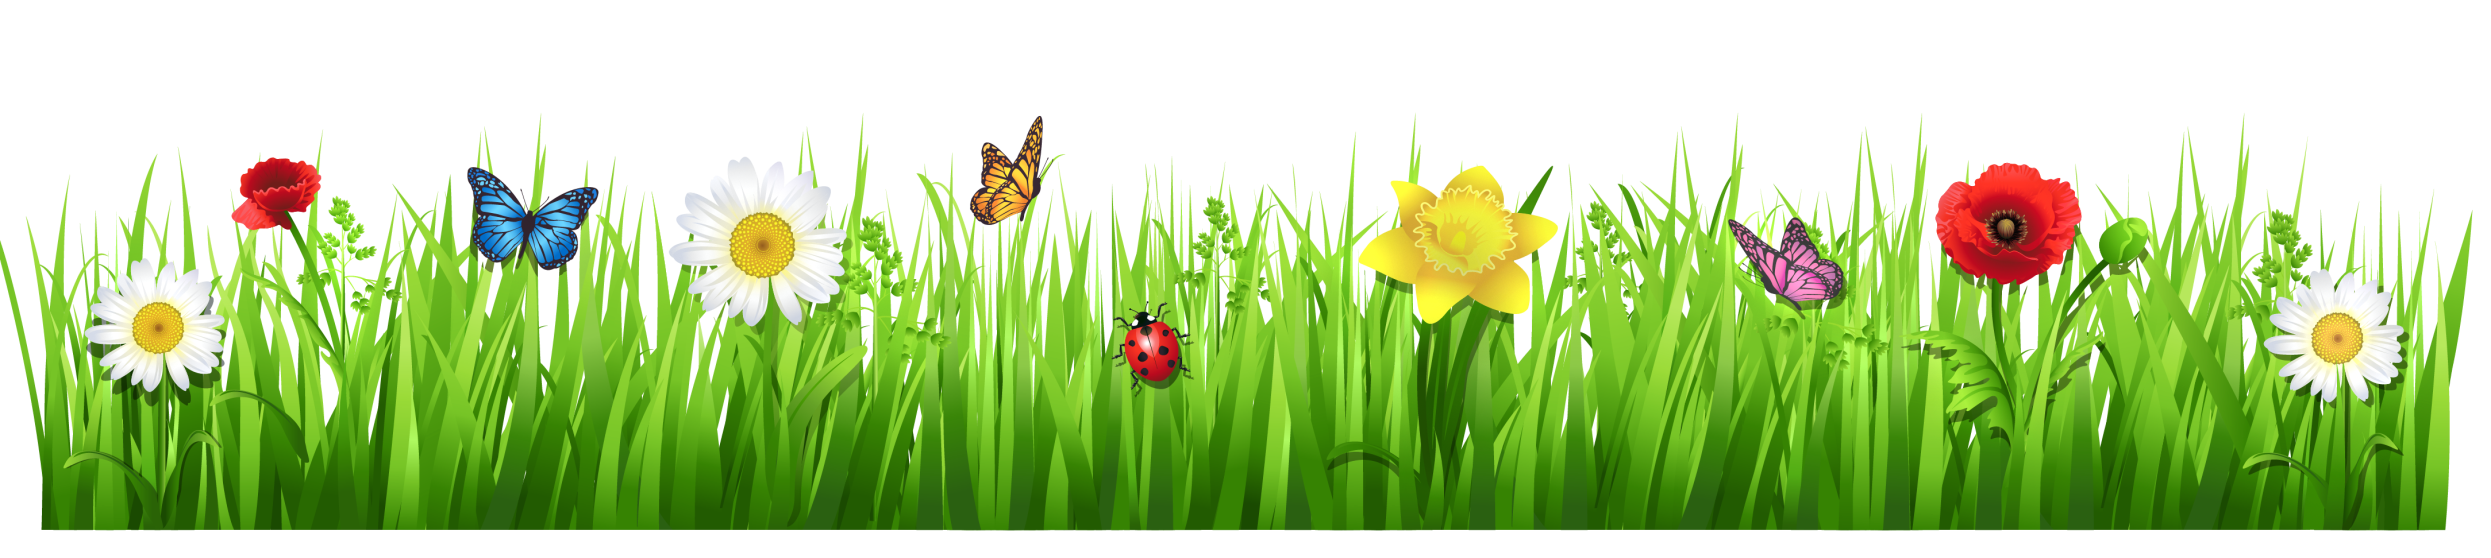 Field Meadow PNG Image High Quality PNG Image